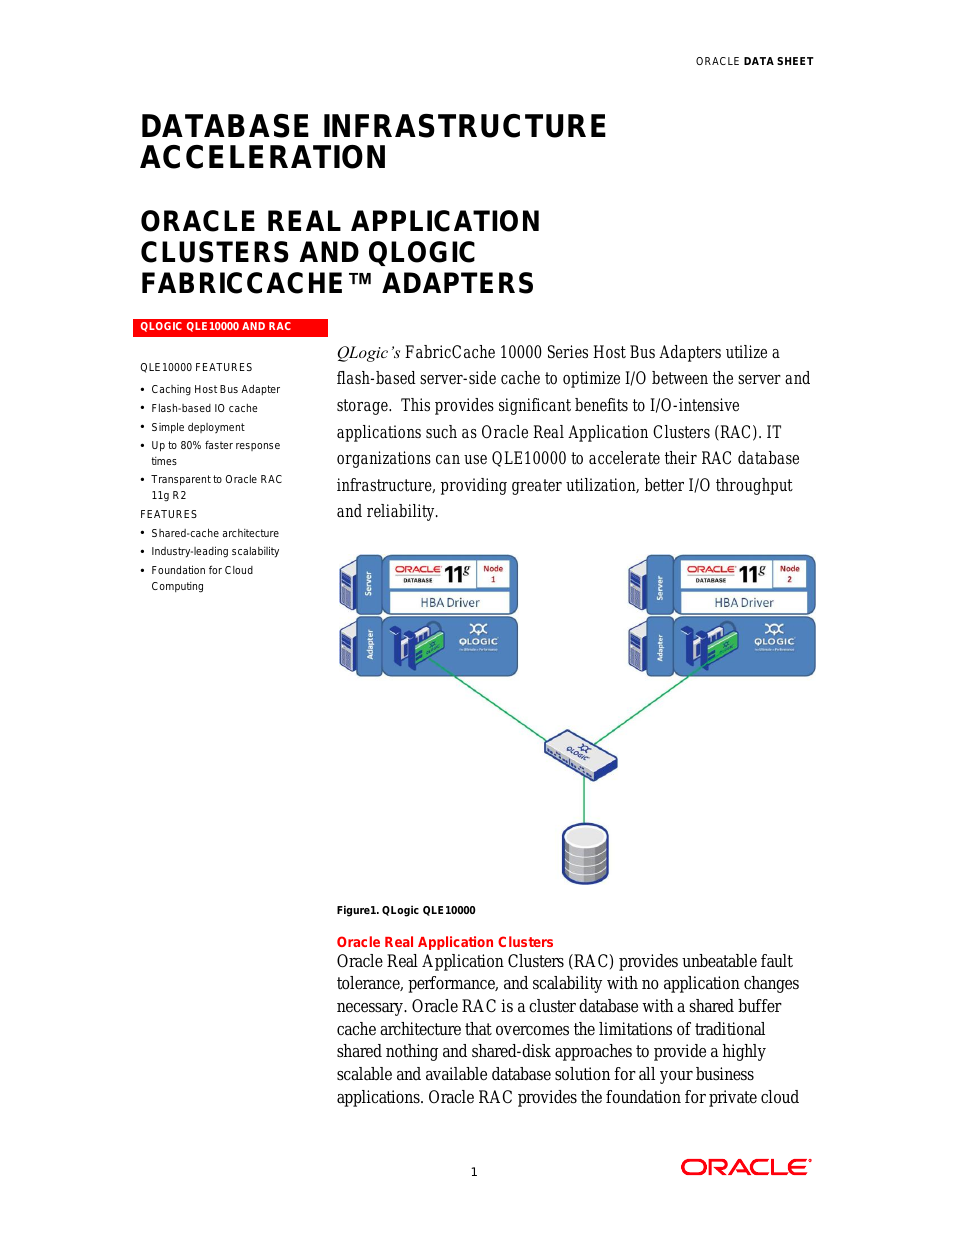 10000 Series DATABASE INFRASTRUCTURE ACCELERATION ORACLE REAL APPLICATION CLUSTERS AND QLOGIC FABRICCACHE ADAPTERS